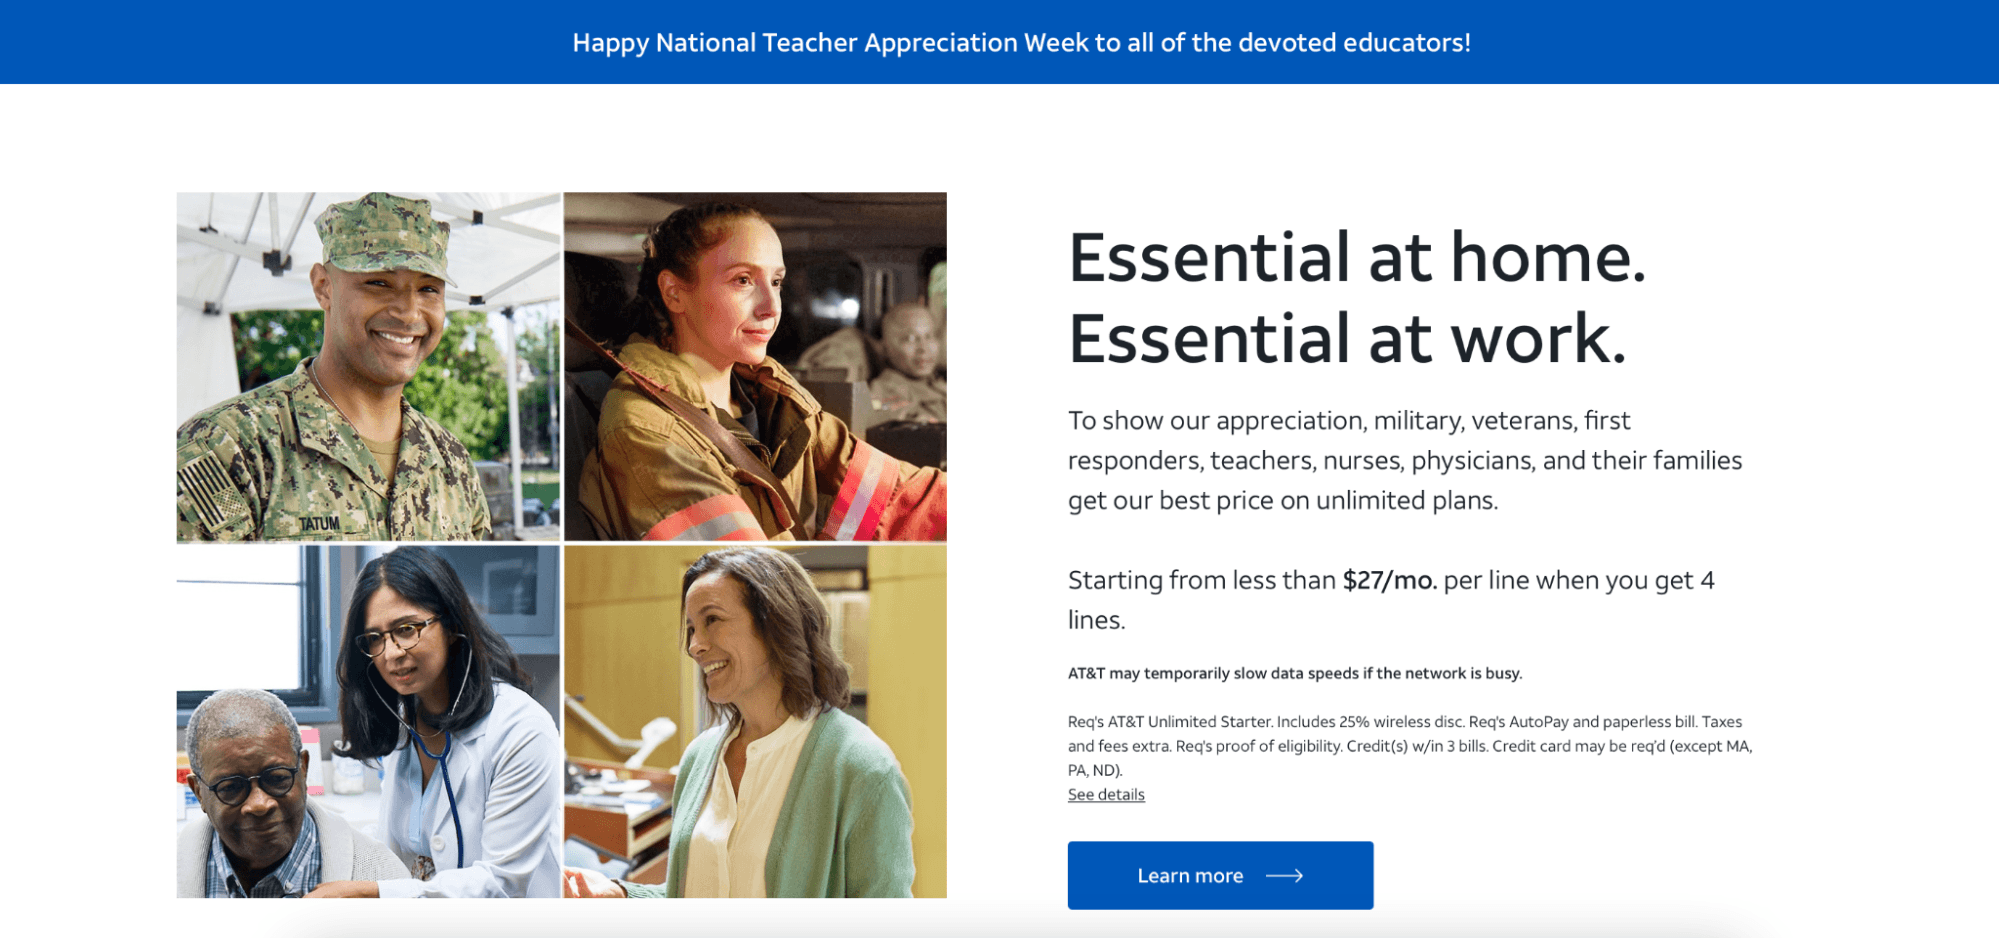 image of webpage showing veterans and describing AT&T's veteran discount